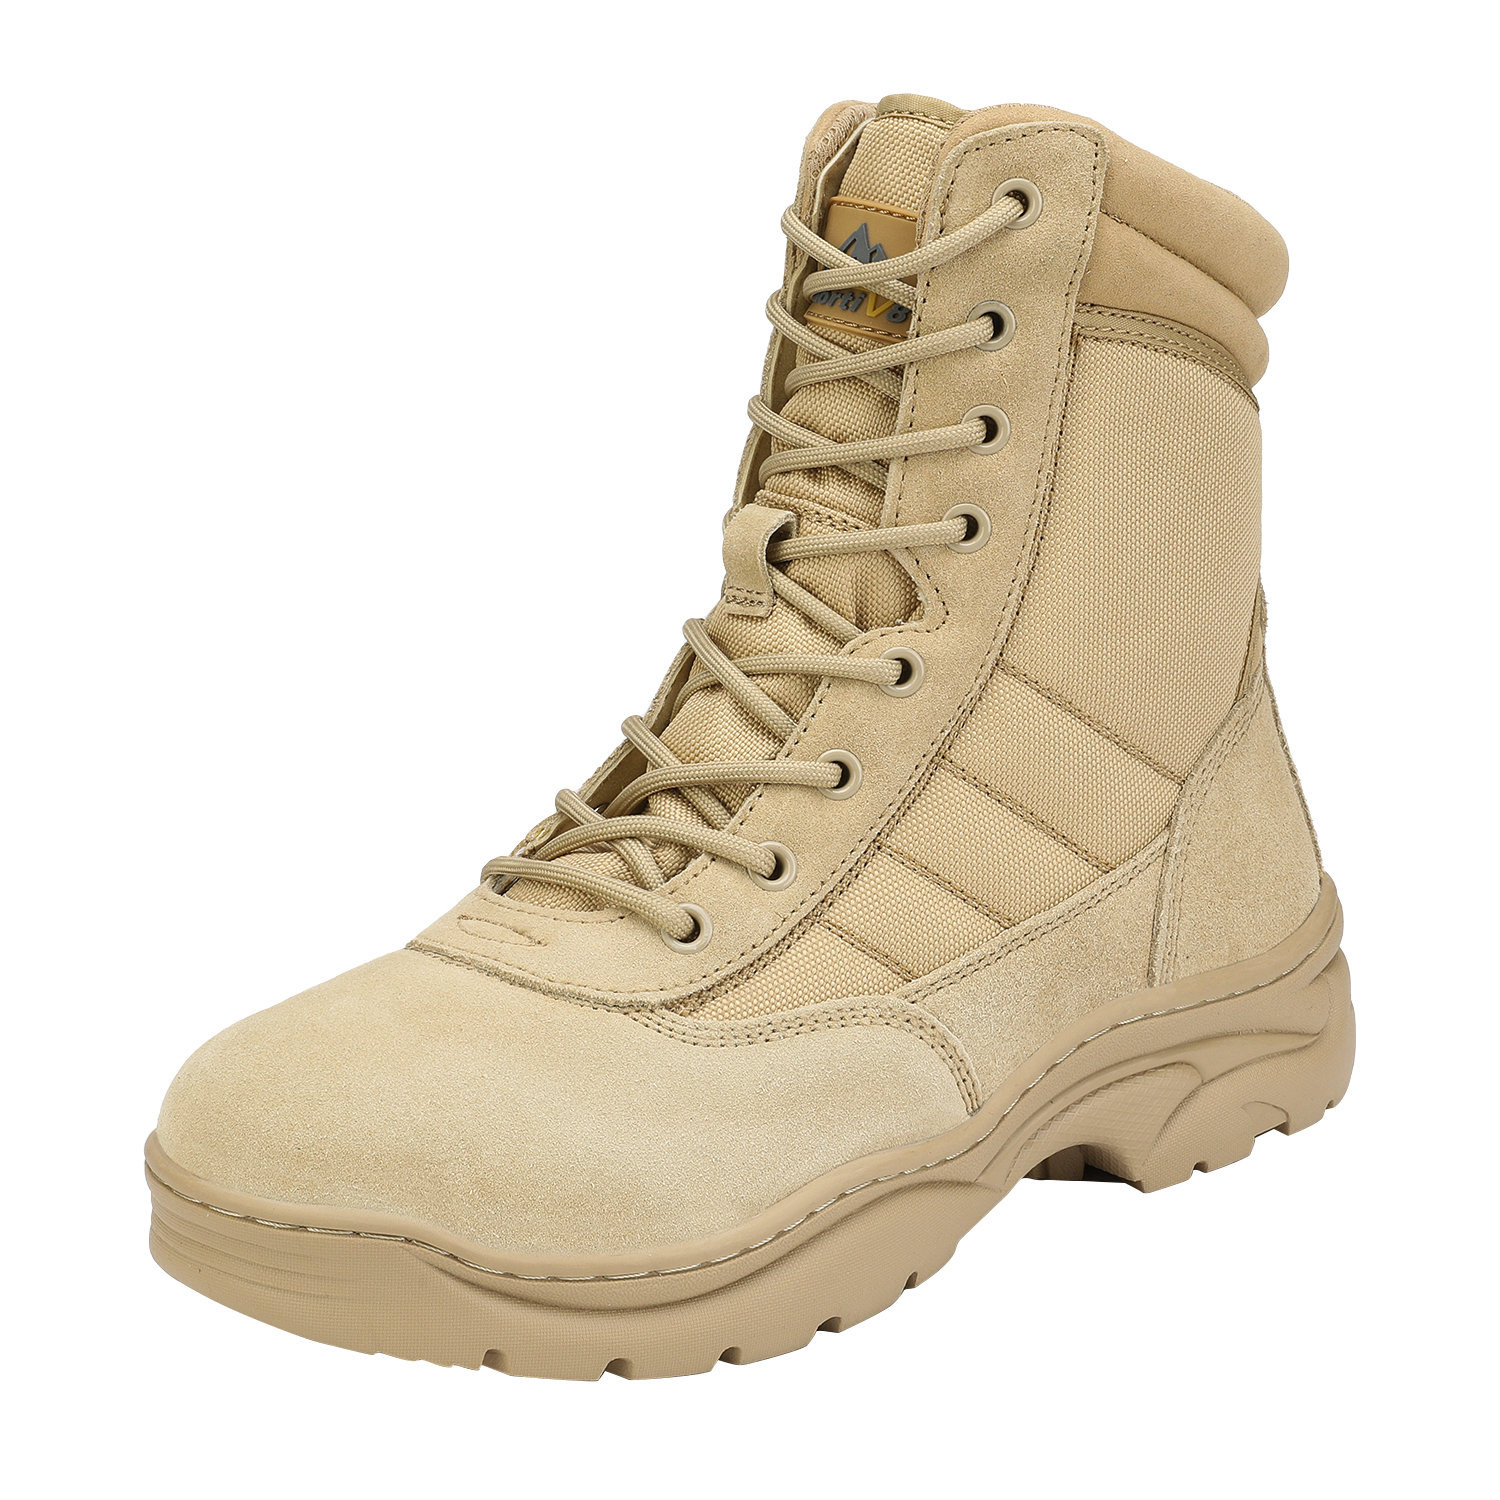 Nortiv 8 Men's Tactical Work Boots Zip Military Leather Motorcycle Combat Boots for Man Trooper Sand Size 12 - image 1 of 6